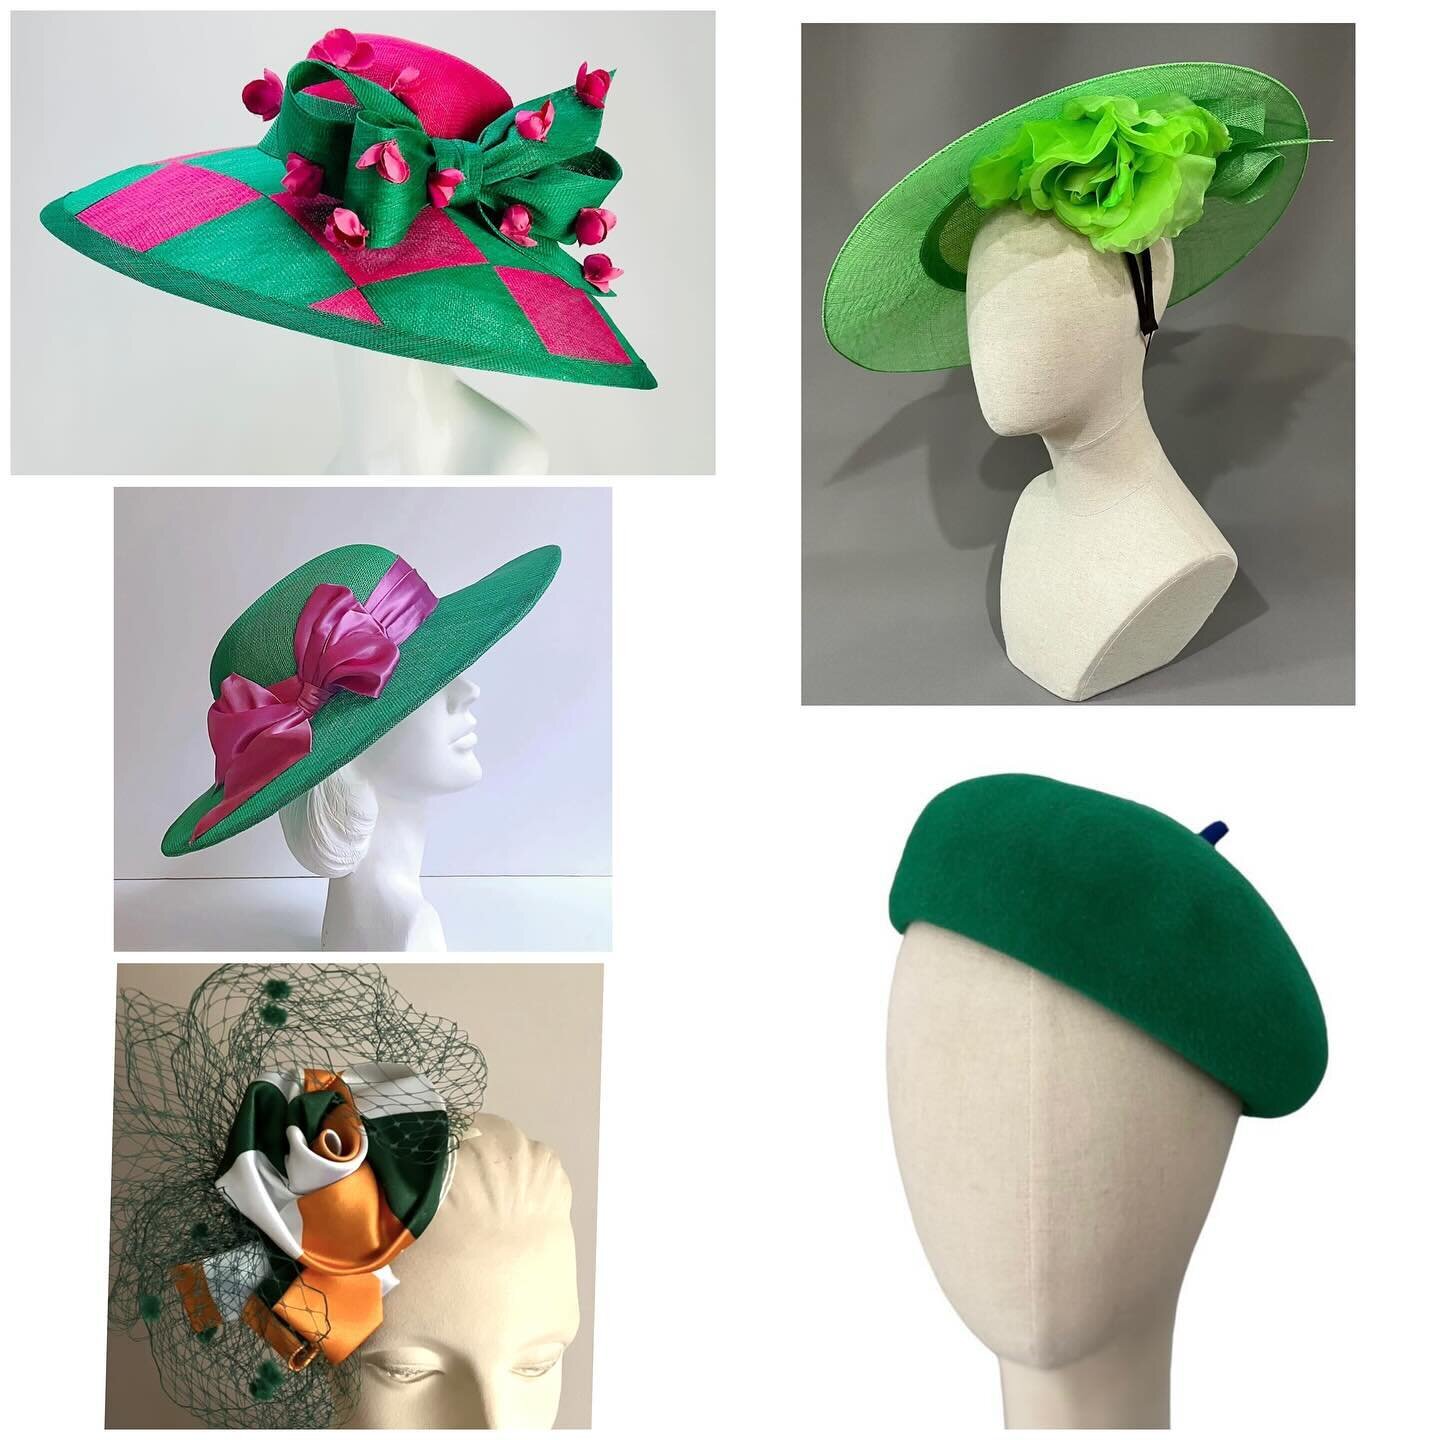 Happy St. Patrick&rsquo;s Day 🍀
Check out these St. Patrick&rsquo;s-themed headpieces from our members 💚 @liftedmillinery @amyjooriginalhats @sfmillinery @jenniferhoertz @bagalemoire